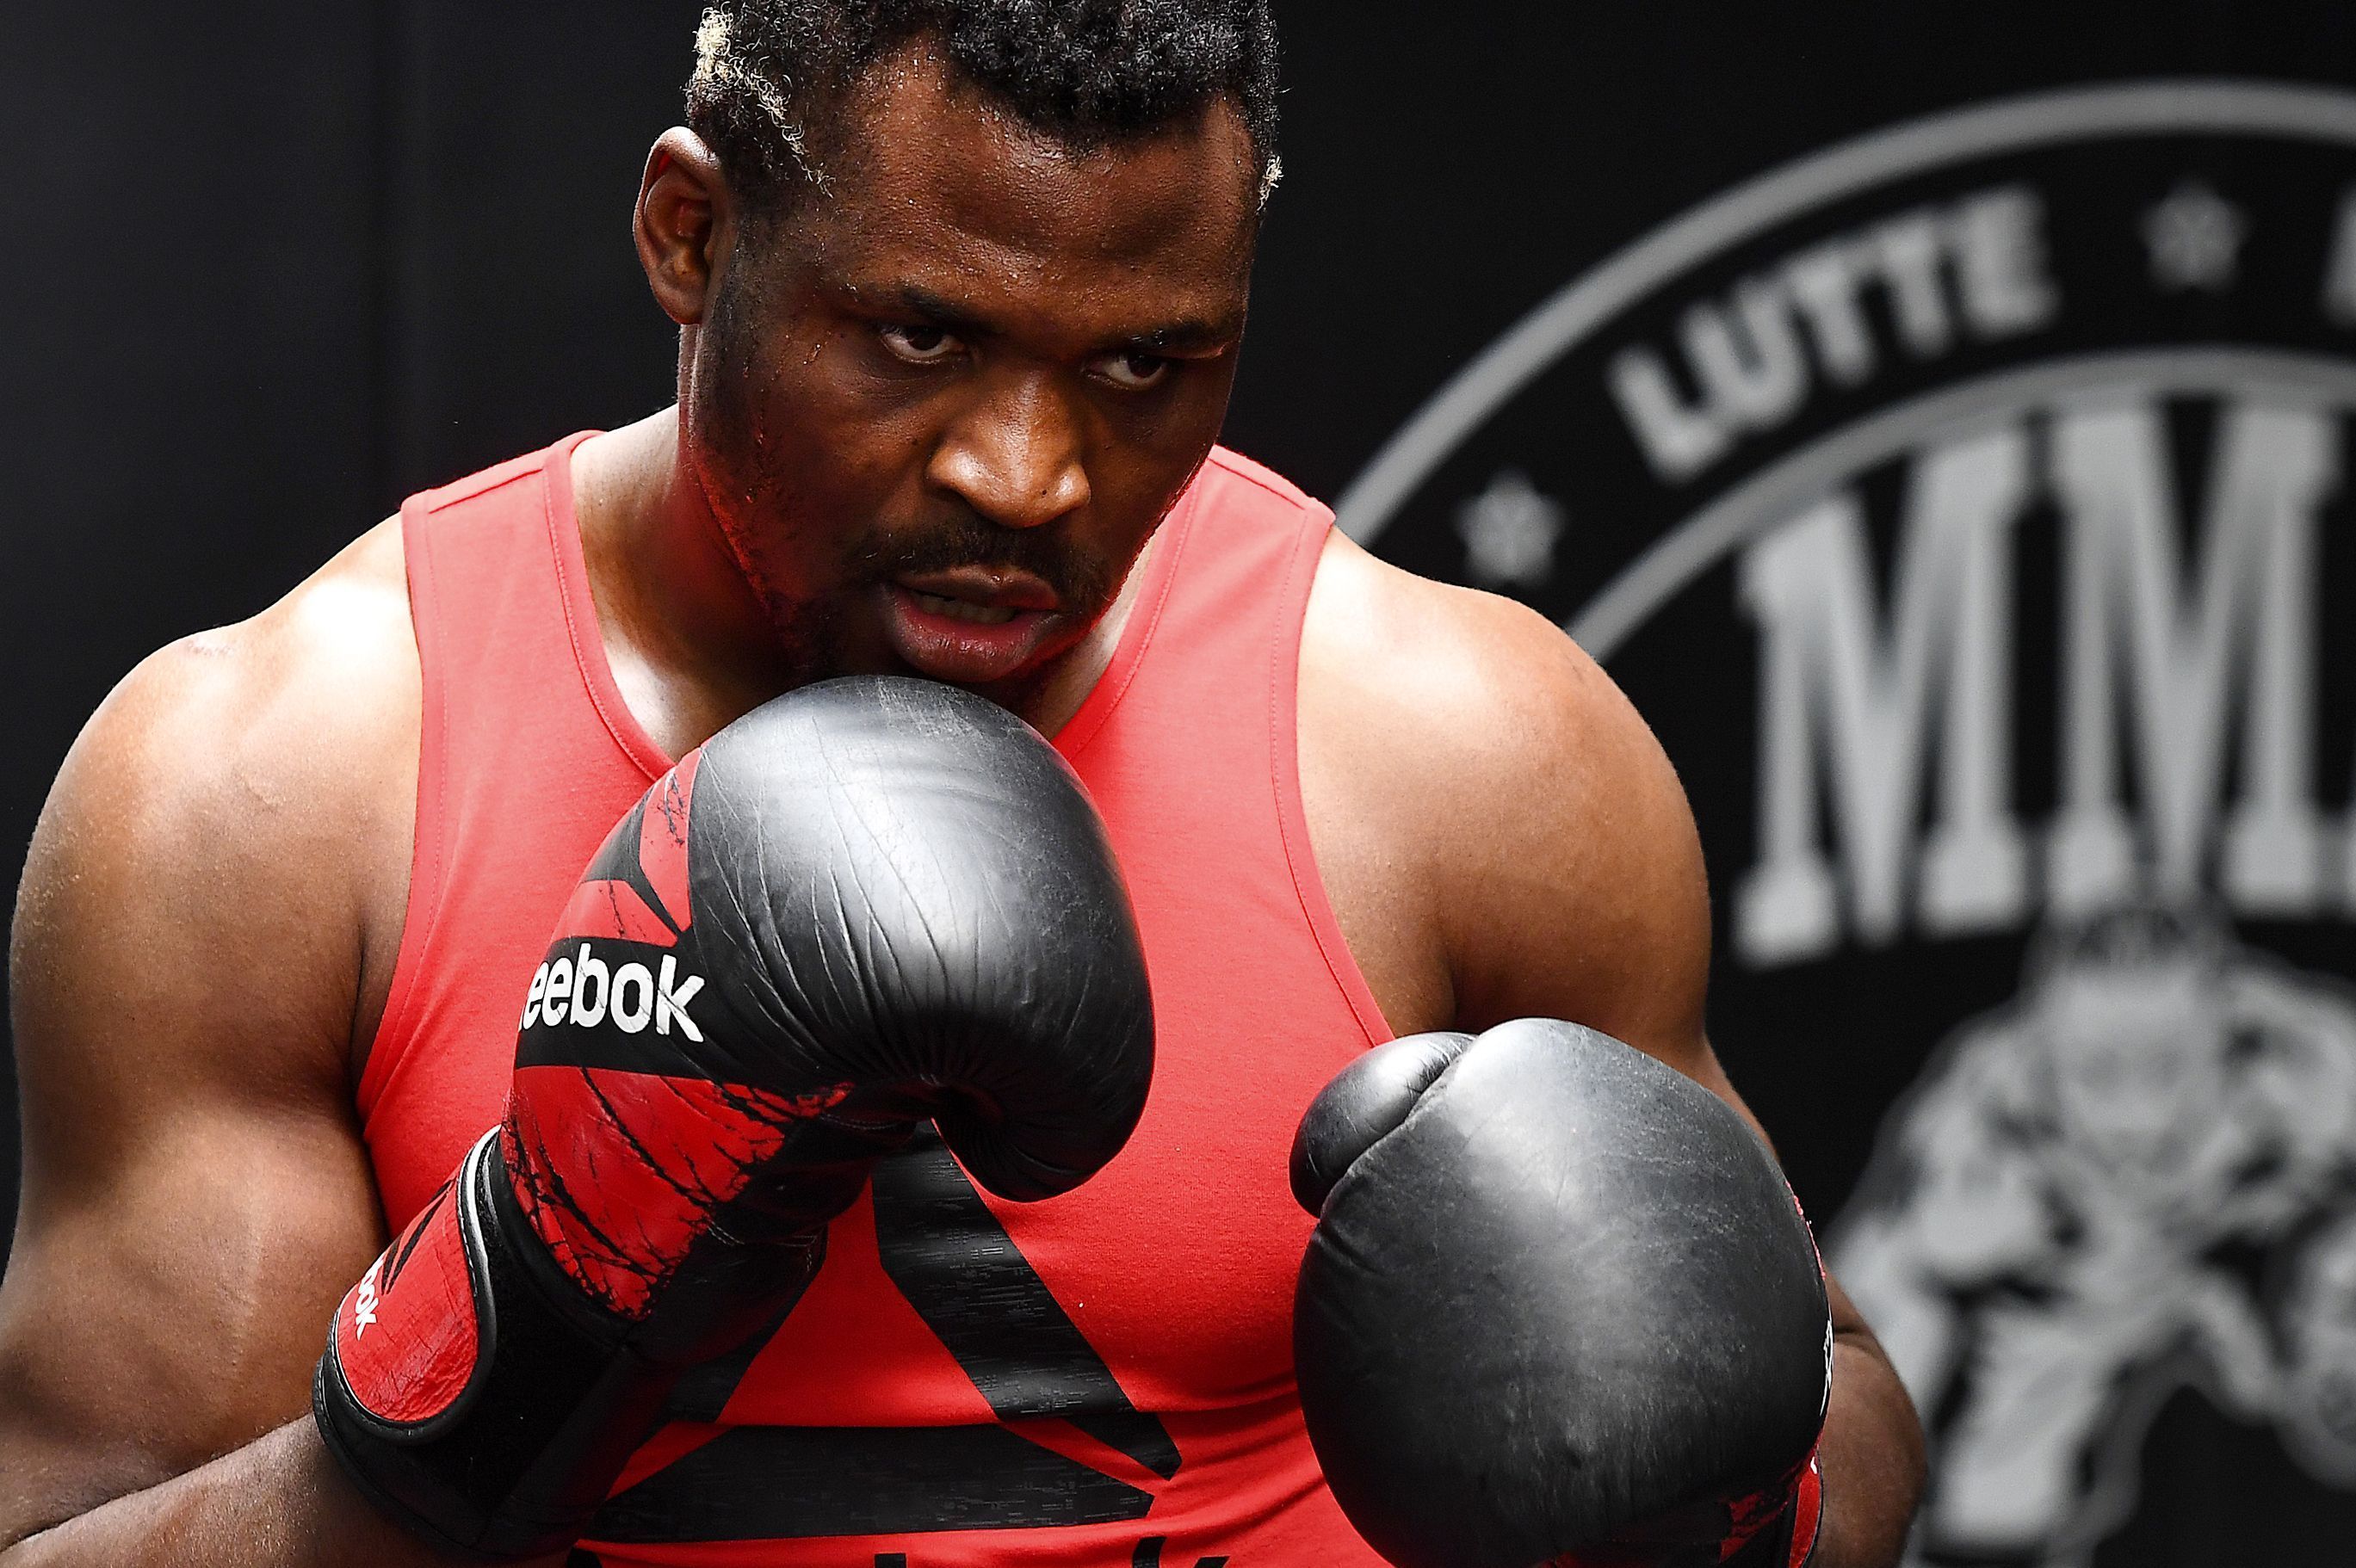 Ngannou wants to get $30 million for his boxing debut